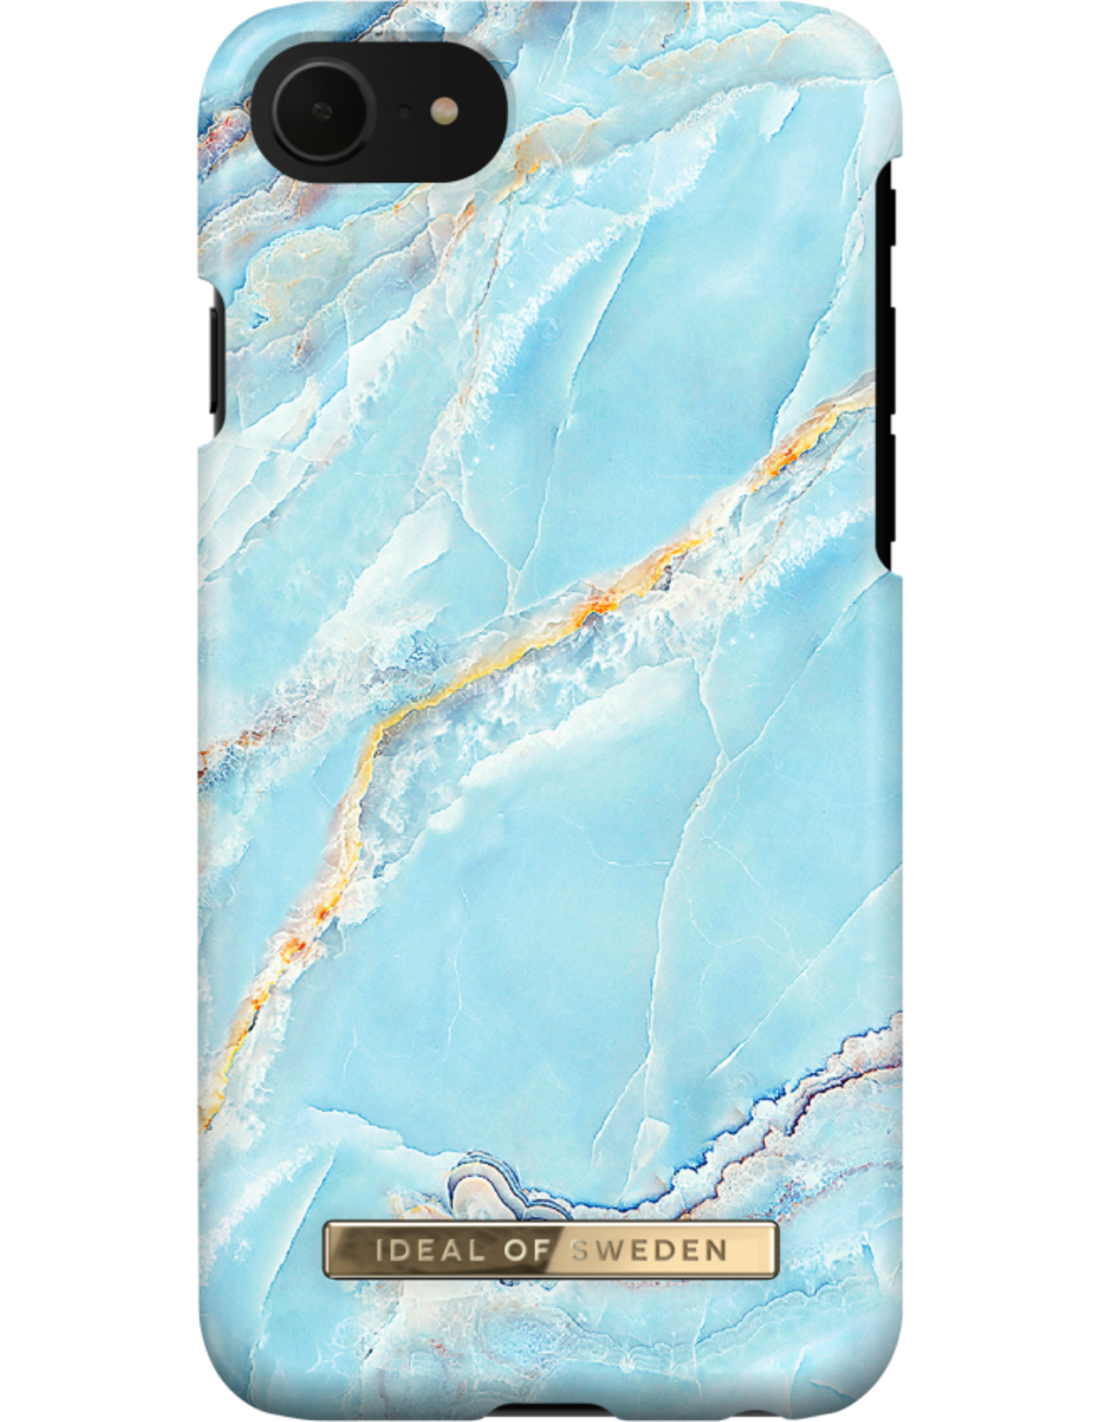 IDEAL OF Island IPhone 8/7/6/6s/SE, Marble Backcover, Paradise Apple, IDFCS17-I7-57, SWEDEN